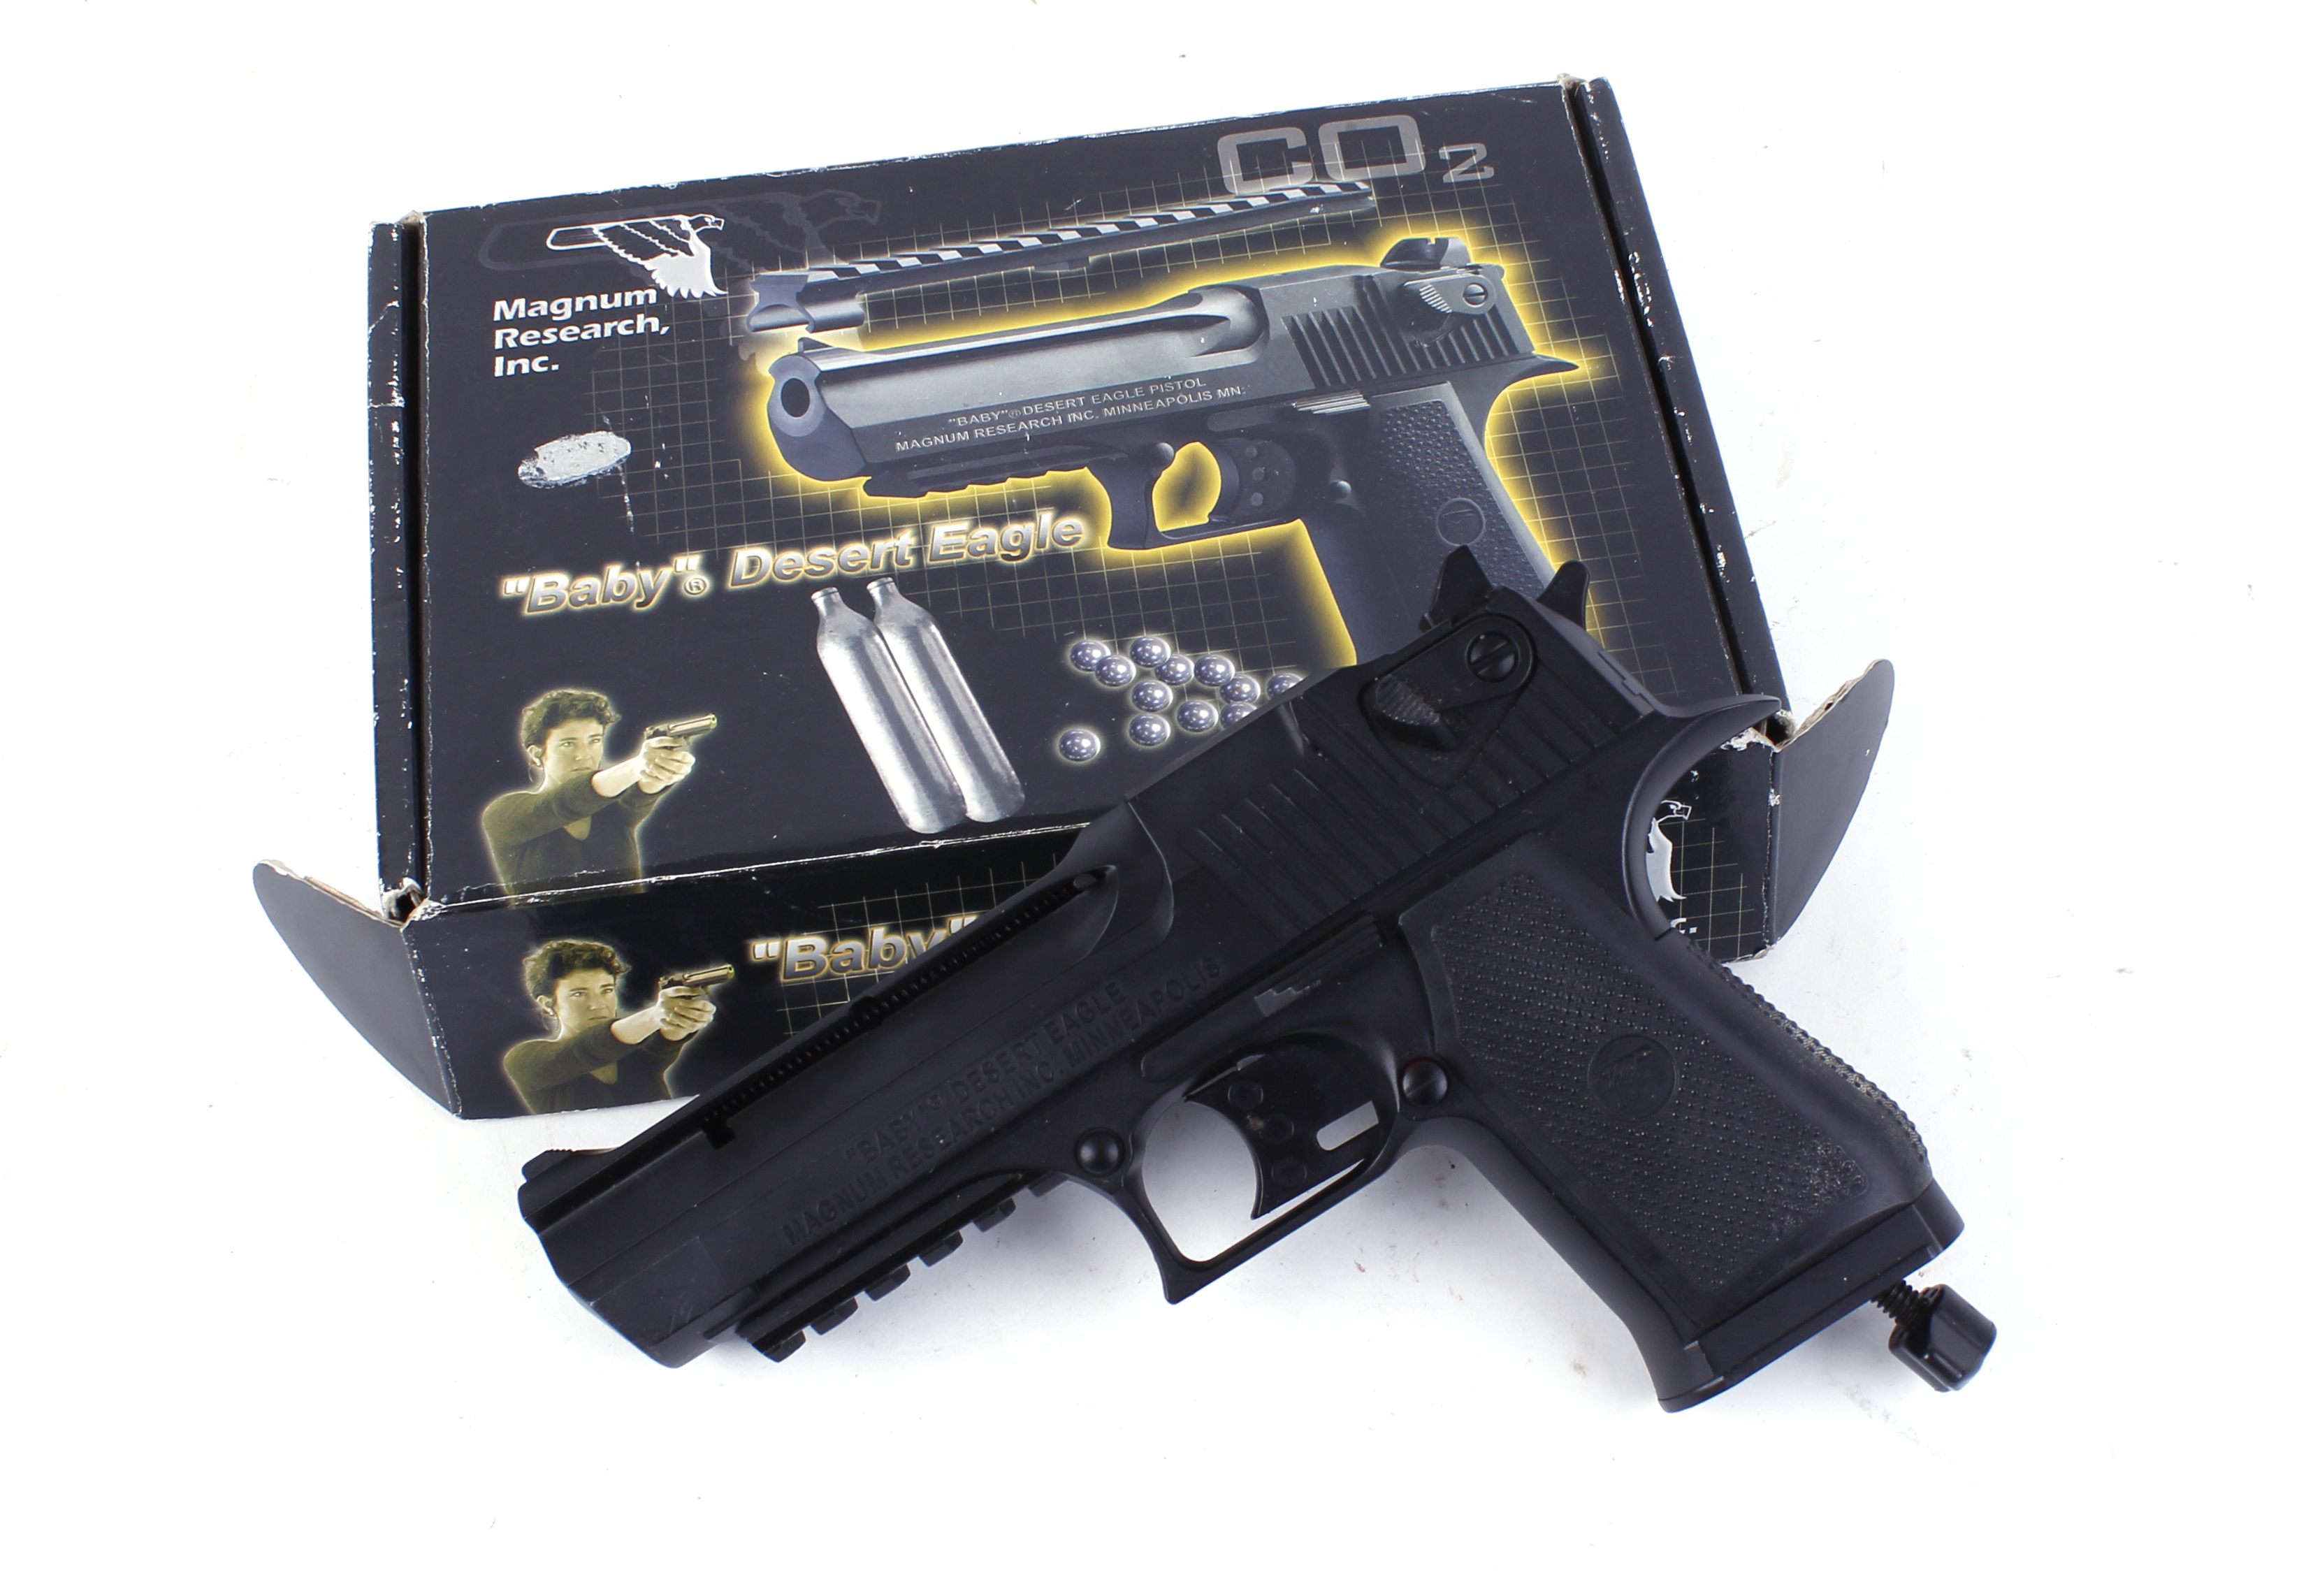 .177 Magnum Research 'Baby' Desert Eagle Co2 air pistol, boxed